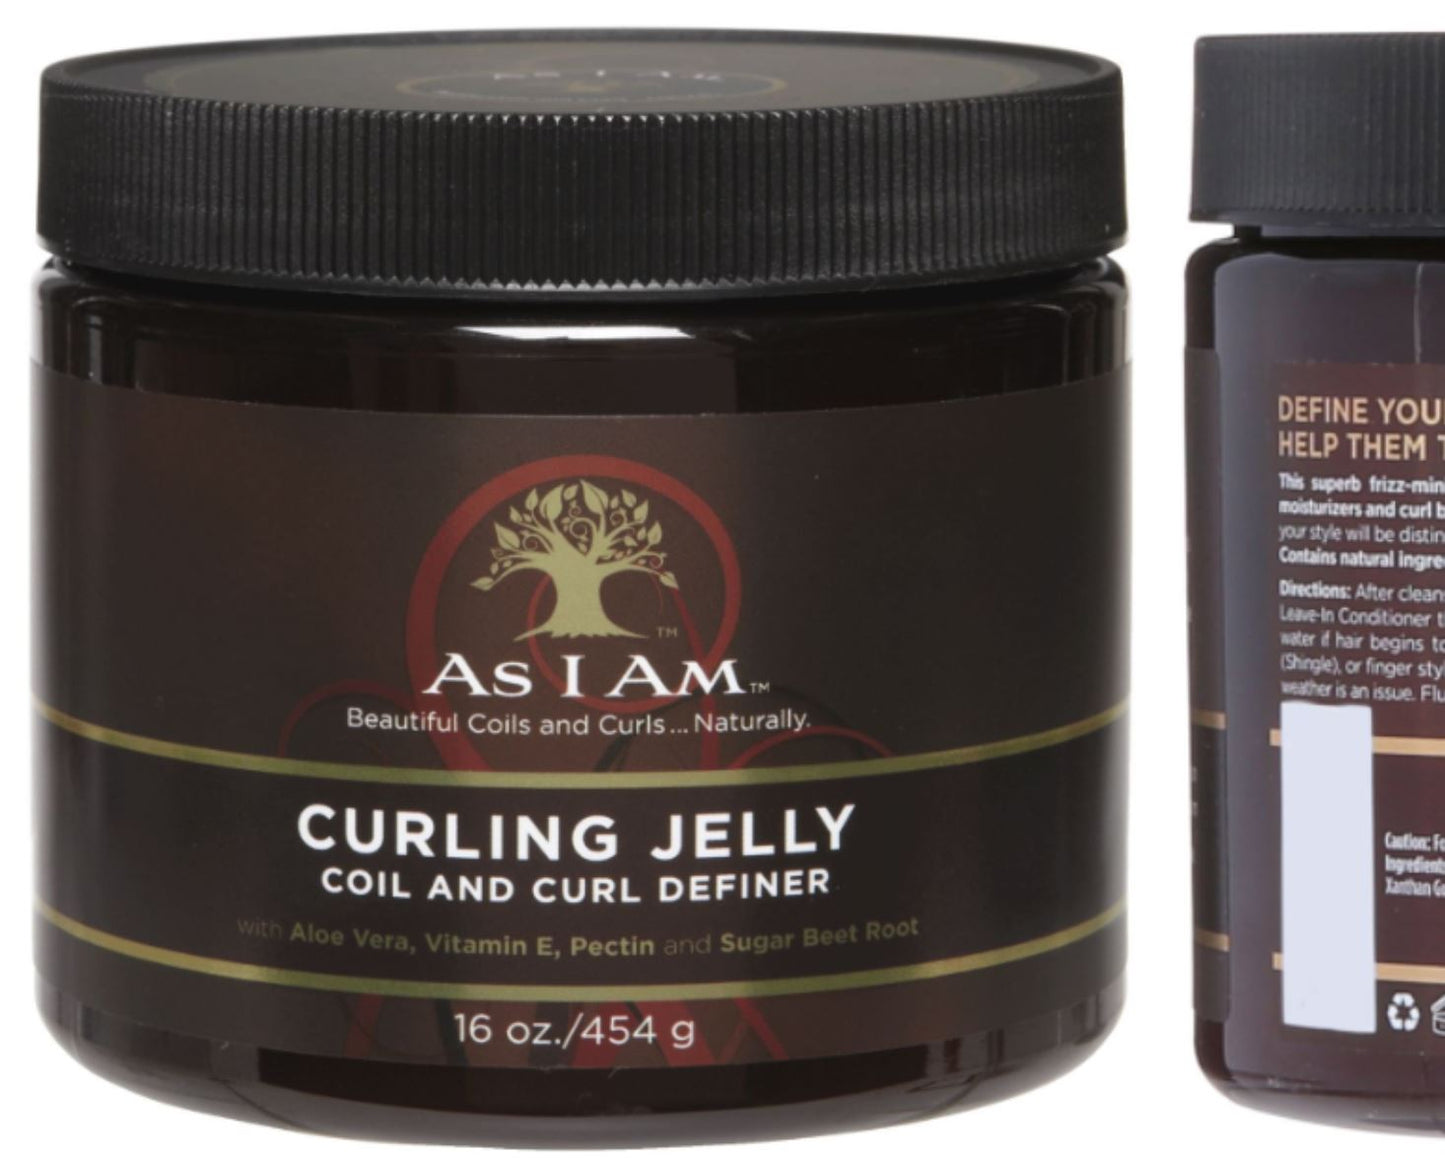 As I Am Curl Jelly Definer